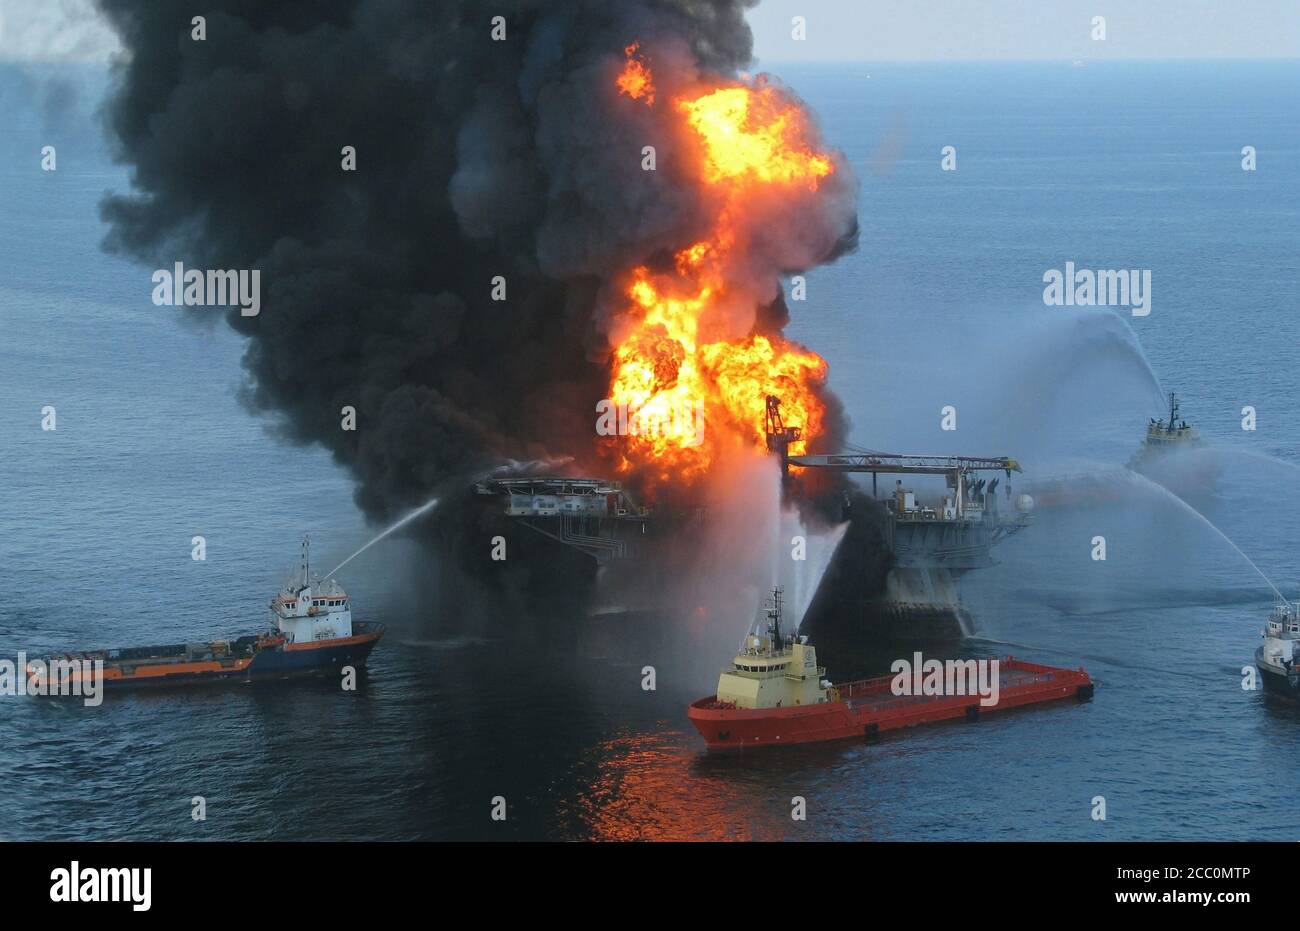 GULF OF MEXICO, USA - 21 April 2010 - Platform supply vessels battle the blazing remnants of the off shore oil rig Deepwater Horizon. A Coast Guard MH Stock Photo